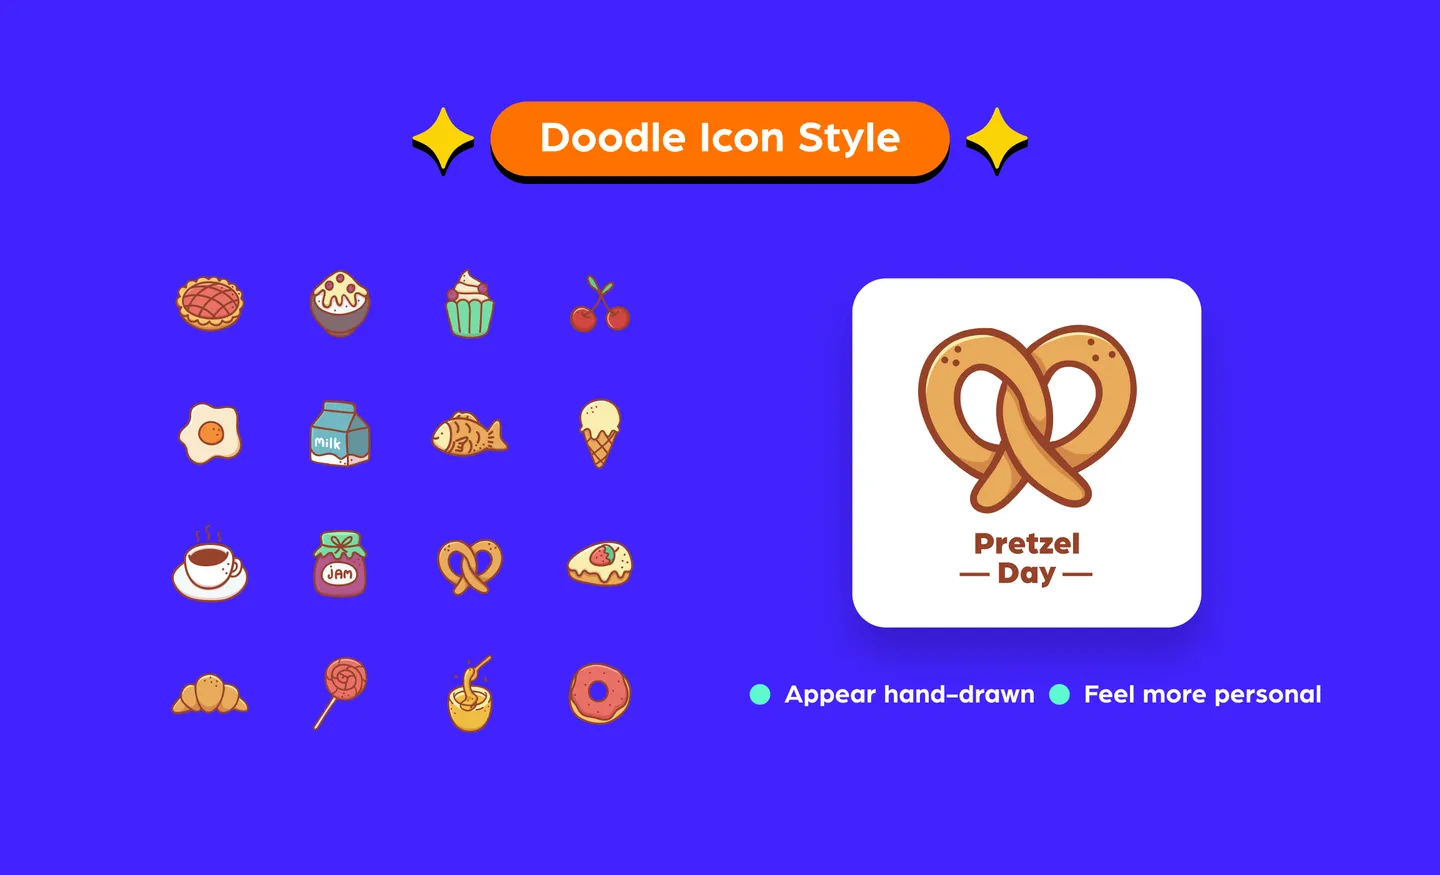 A guide to the doodle icon style